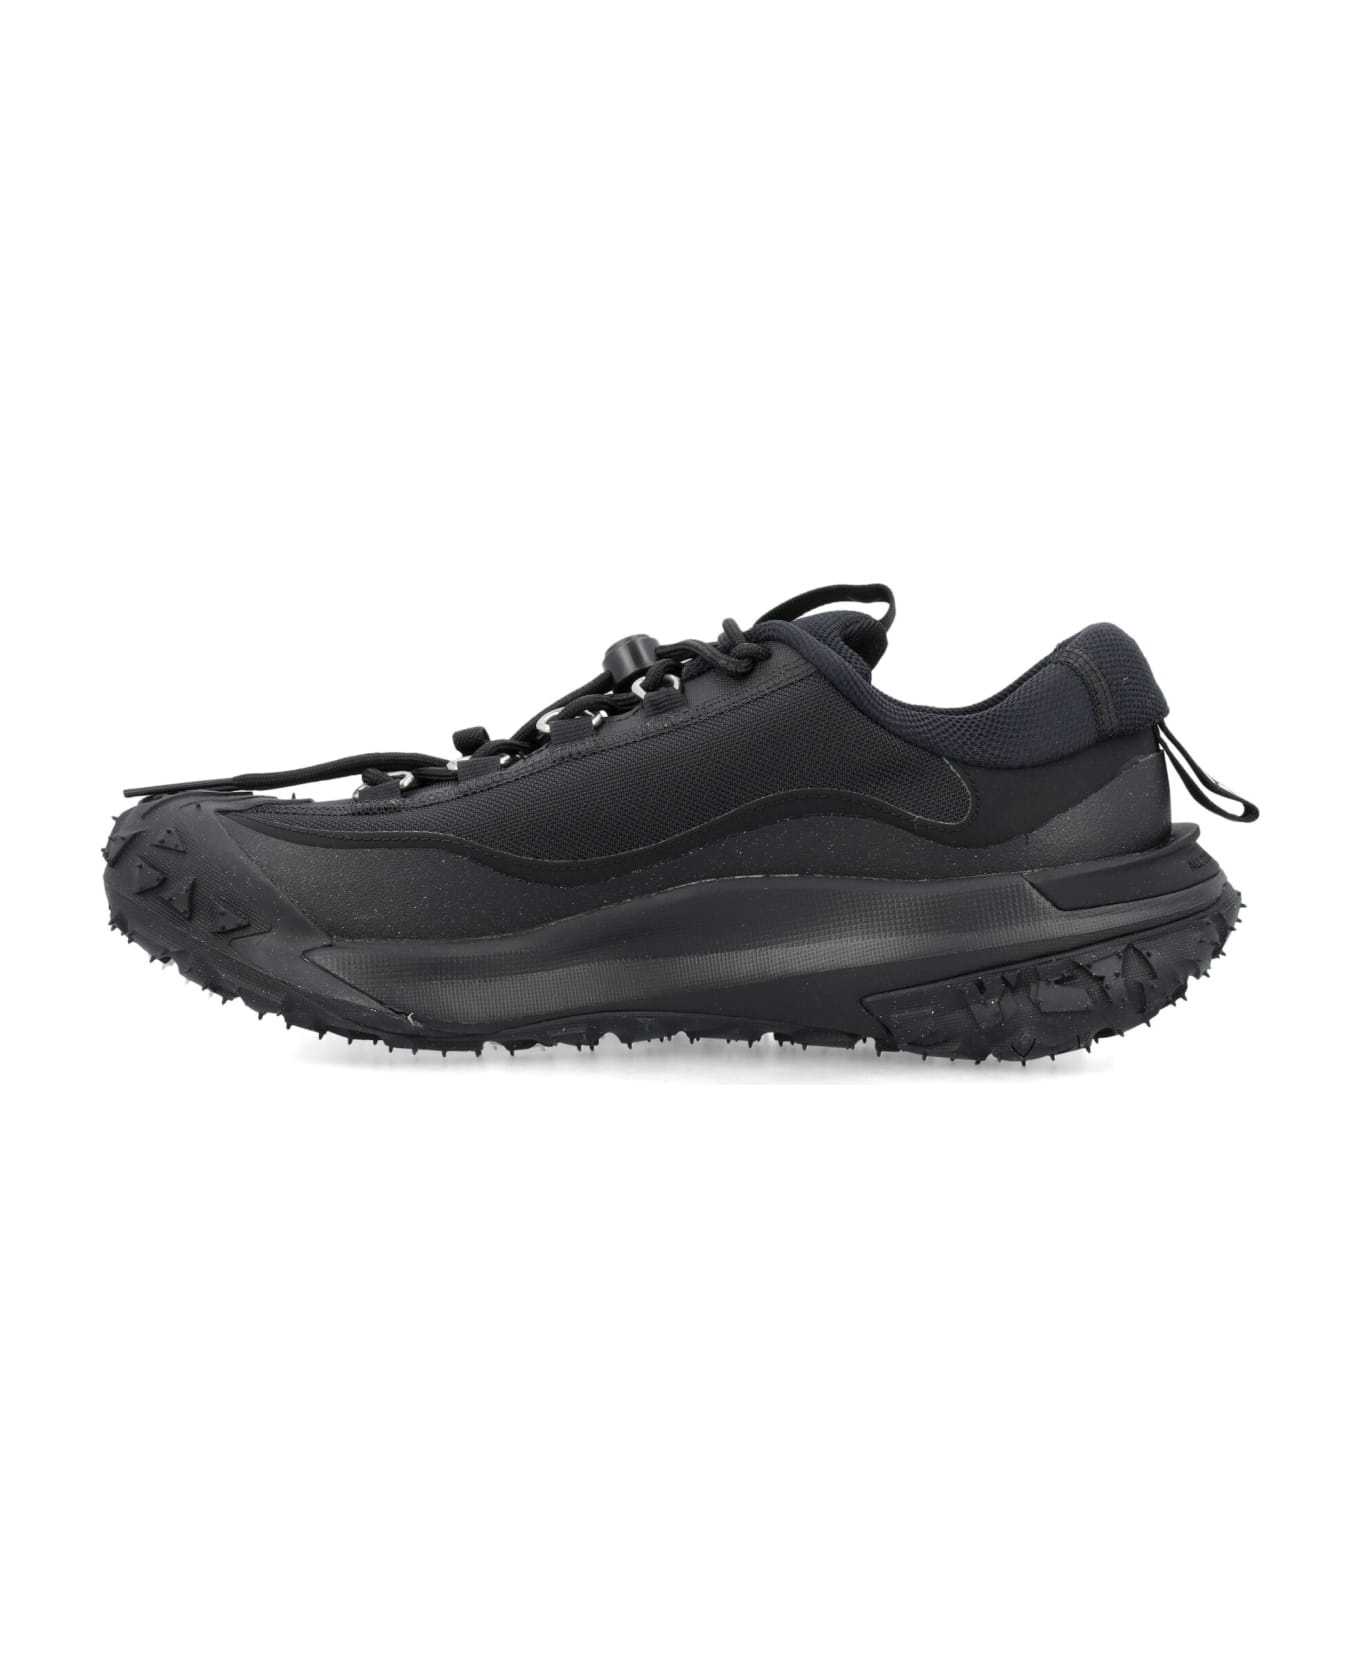 Acg Mountain Fly 2 Low - 3